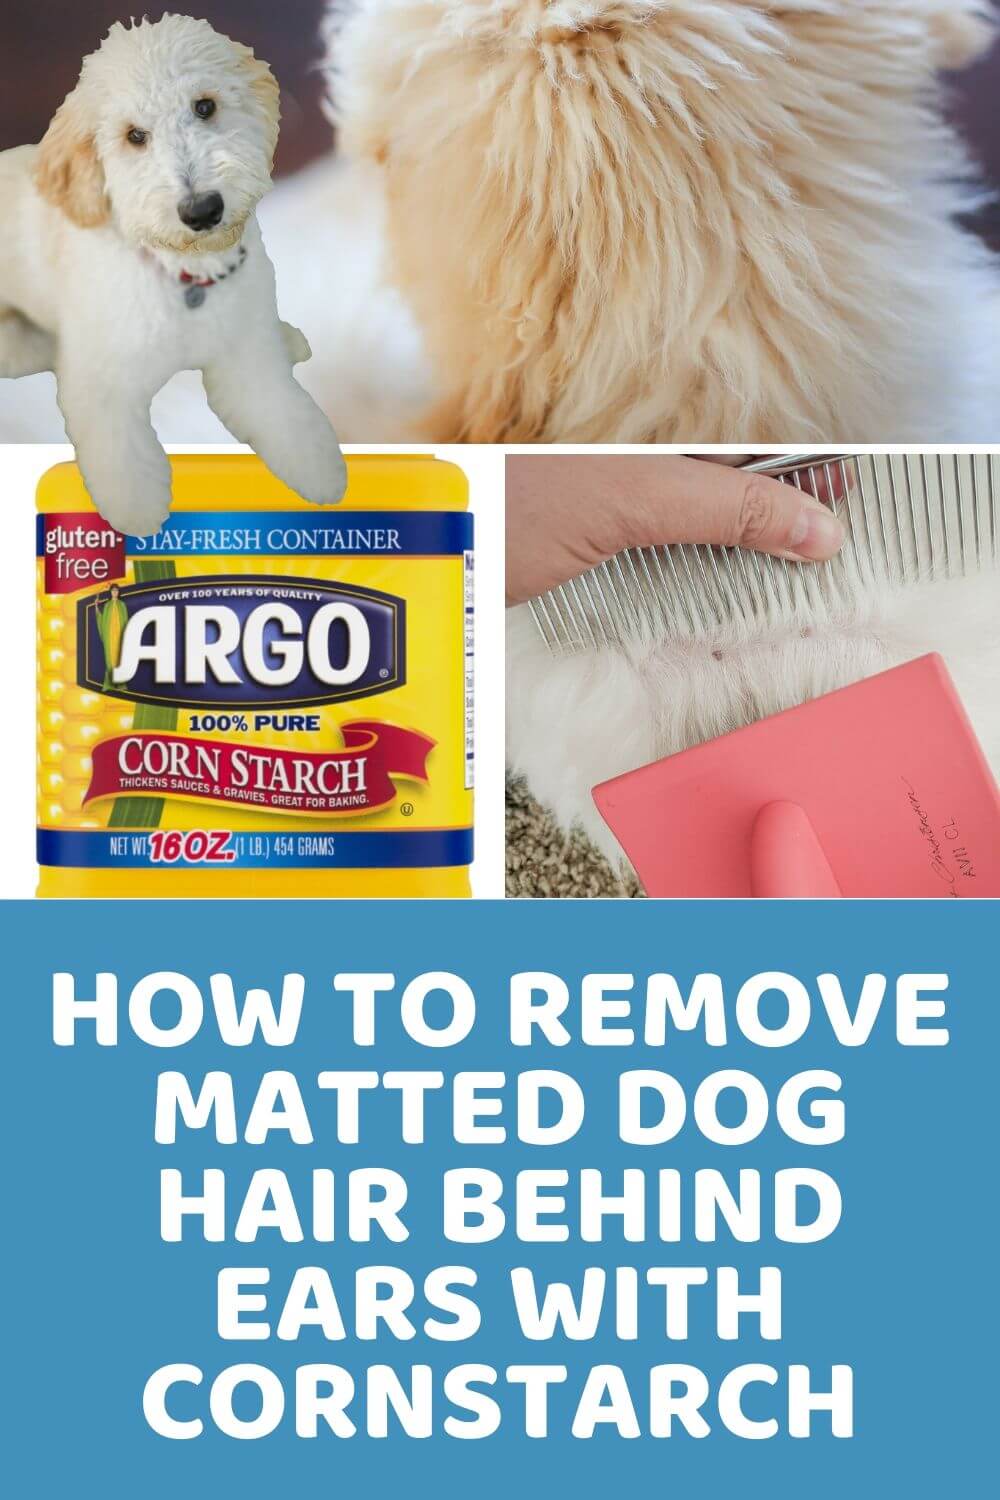 How to Remove Matted Dog Hair Behind Ears With Cornstarch